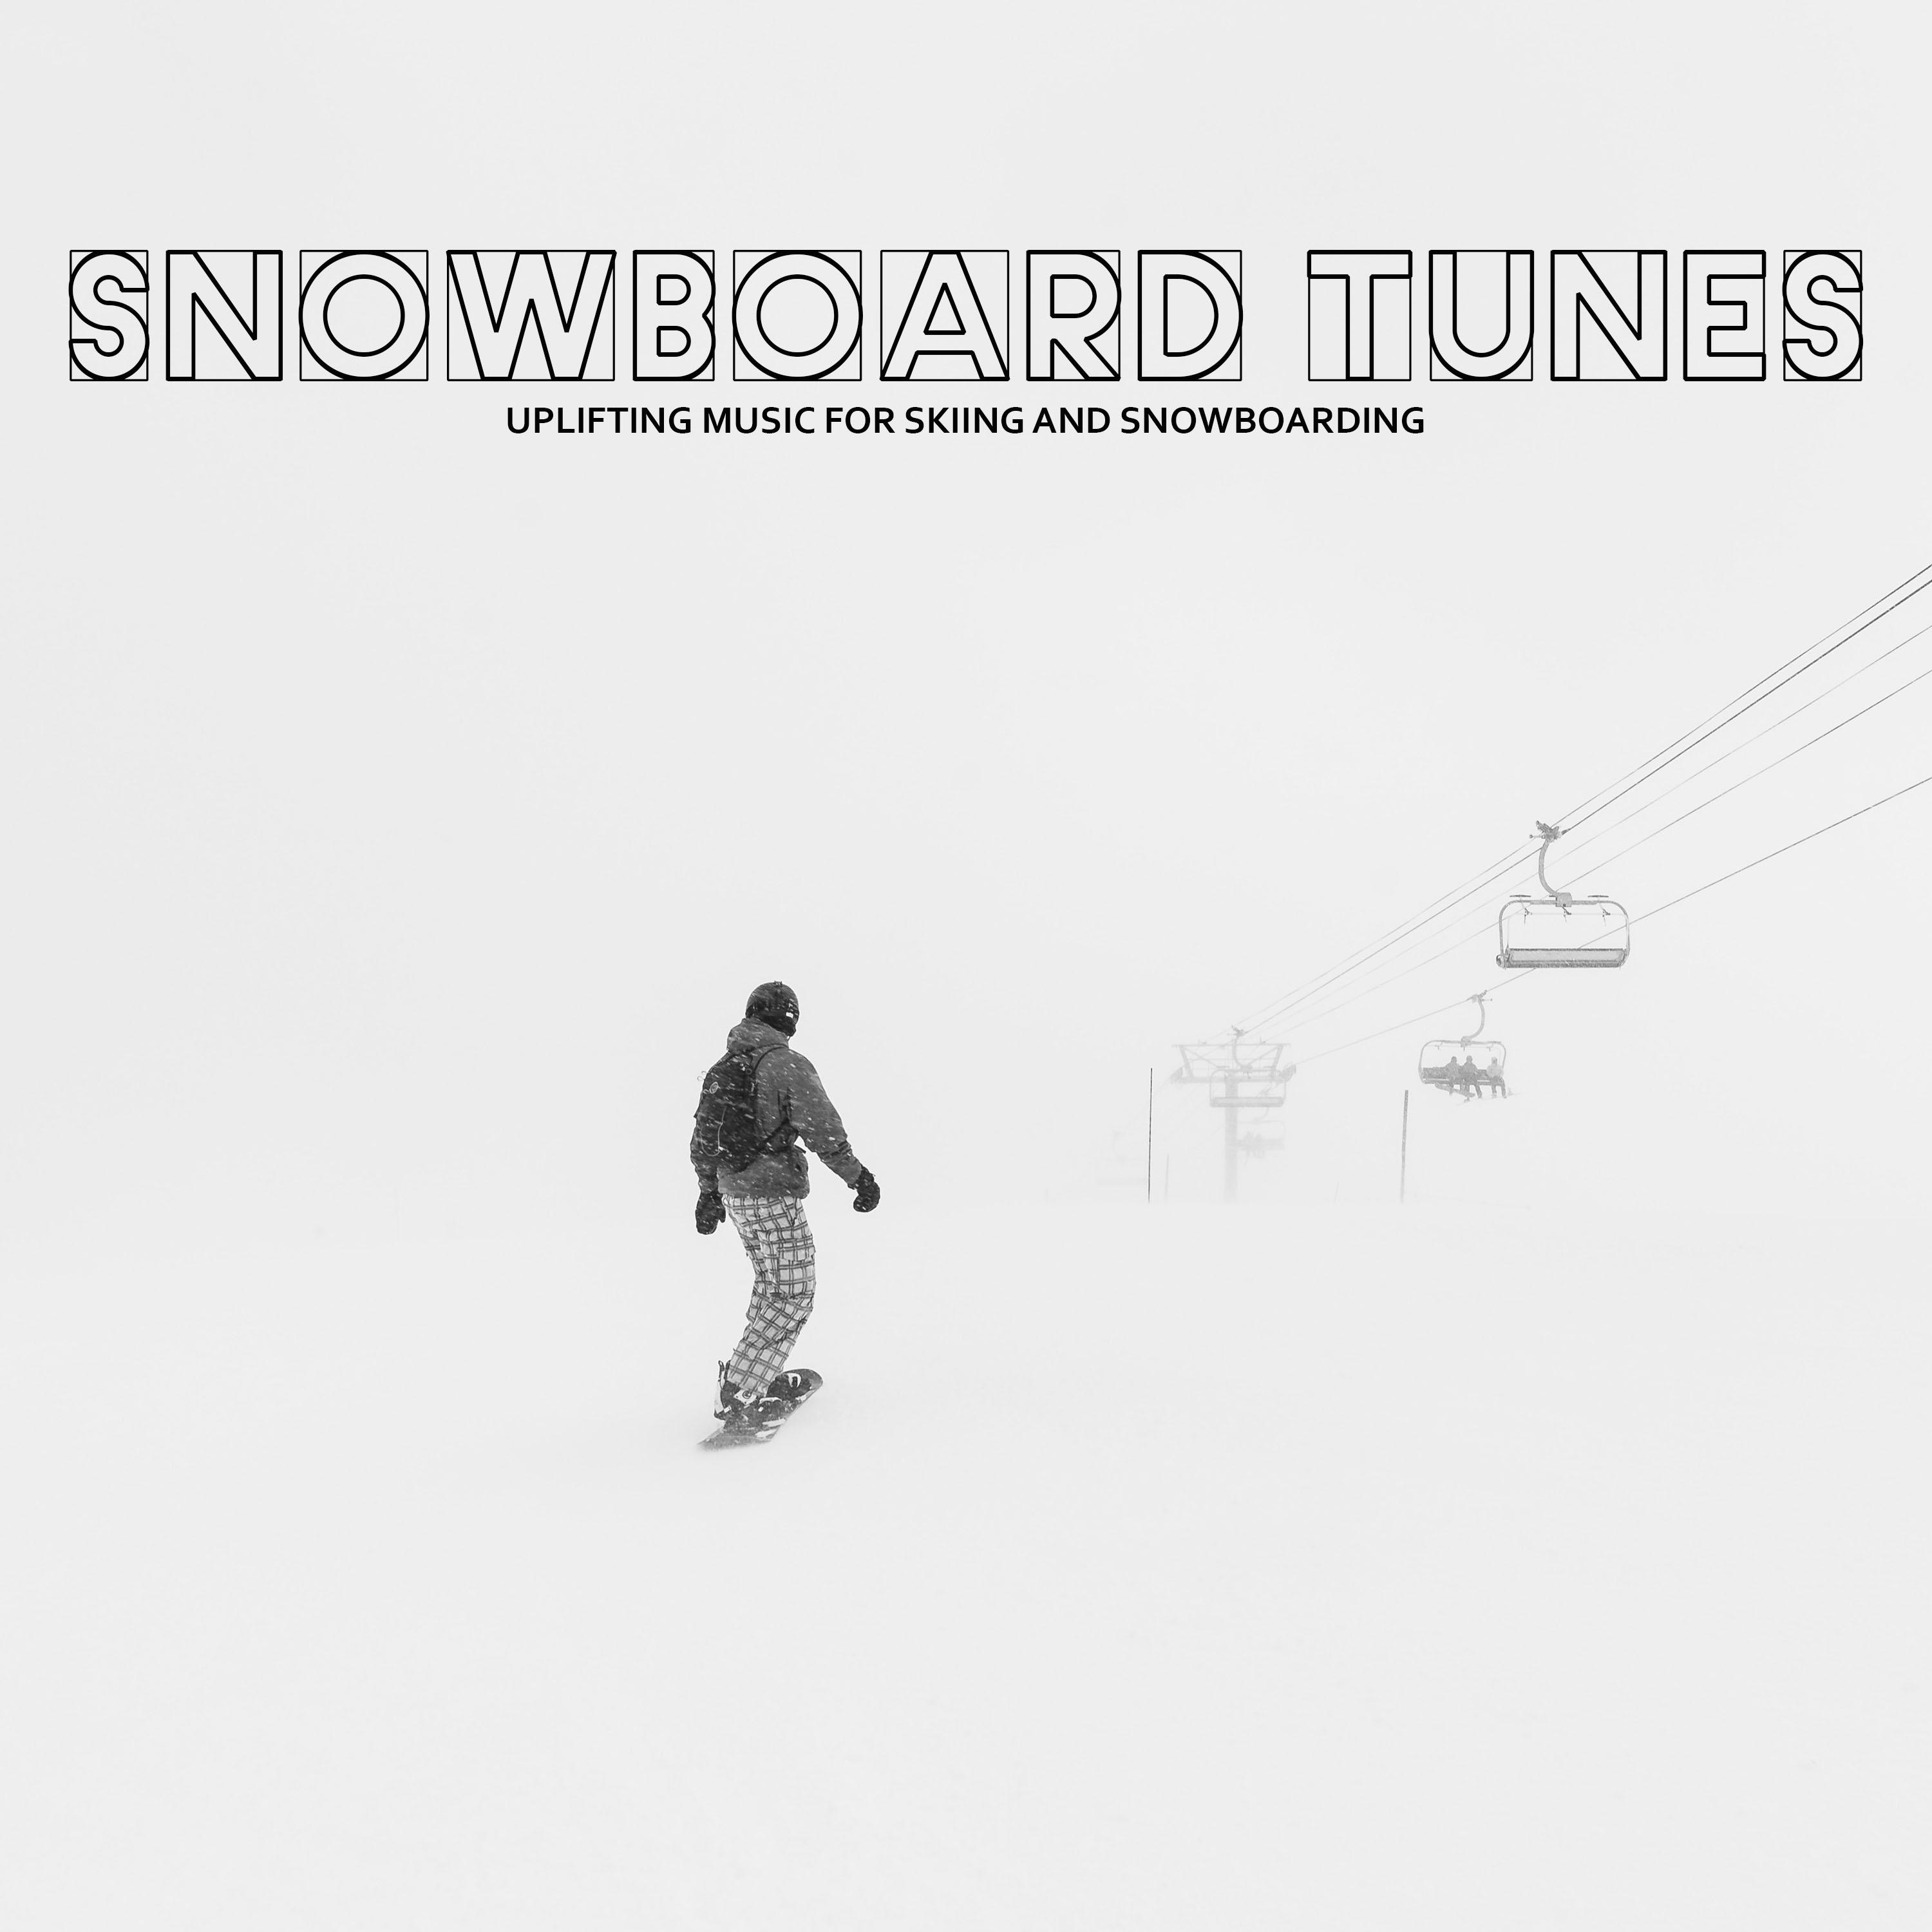 Snowboard Tunes (Uplifting Music for Skiing and Snowboarding)